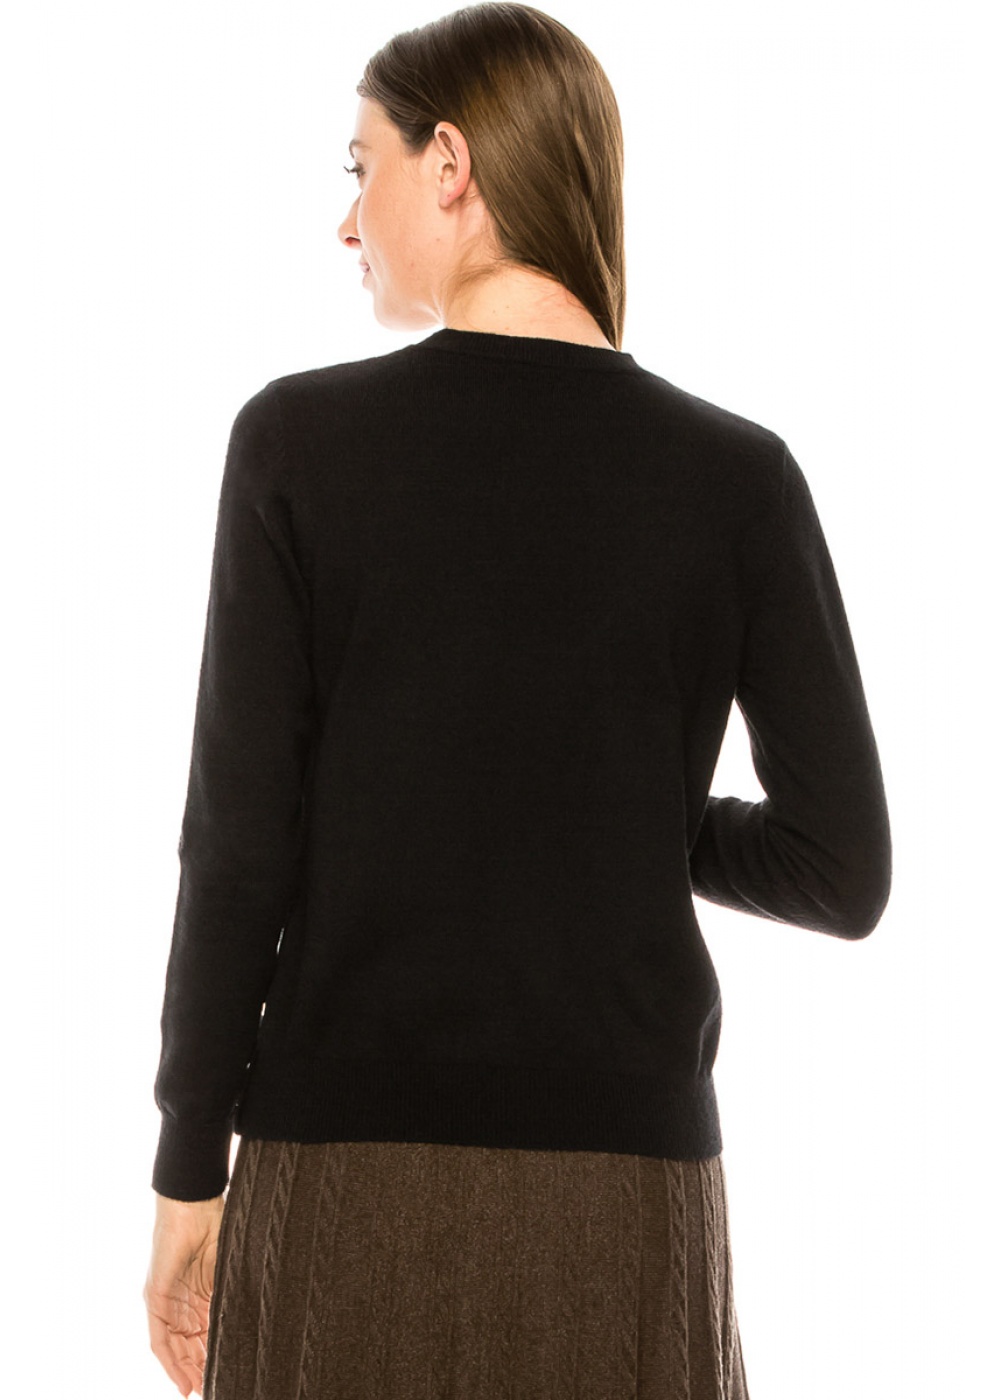 Black sweater with two rows of button decor